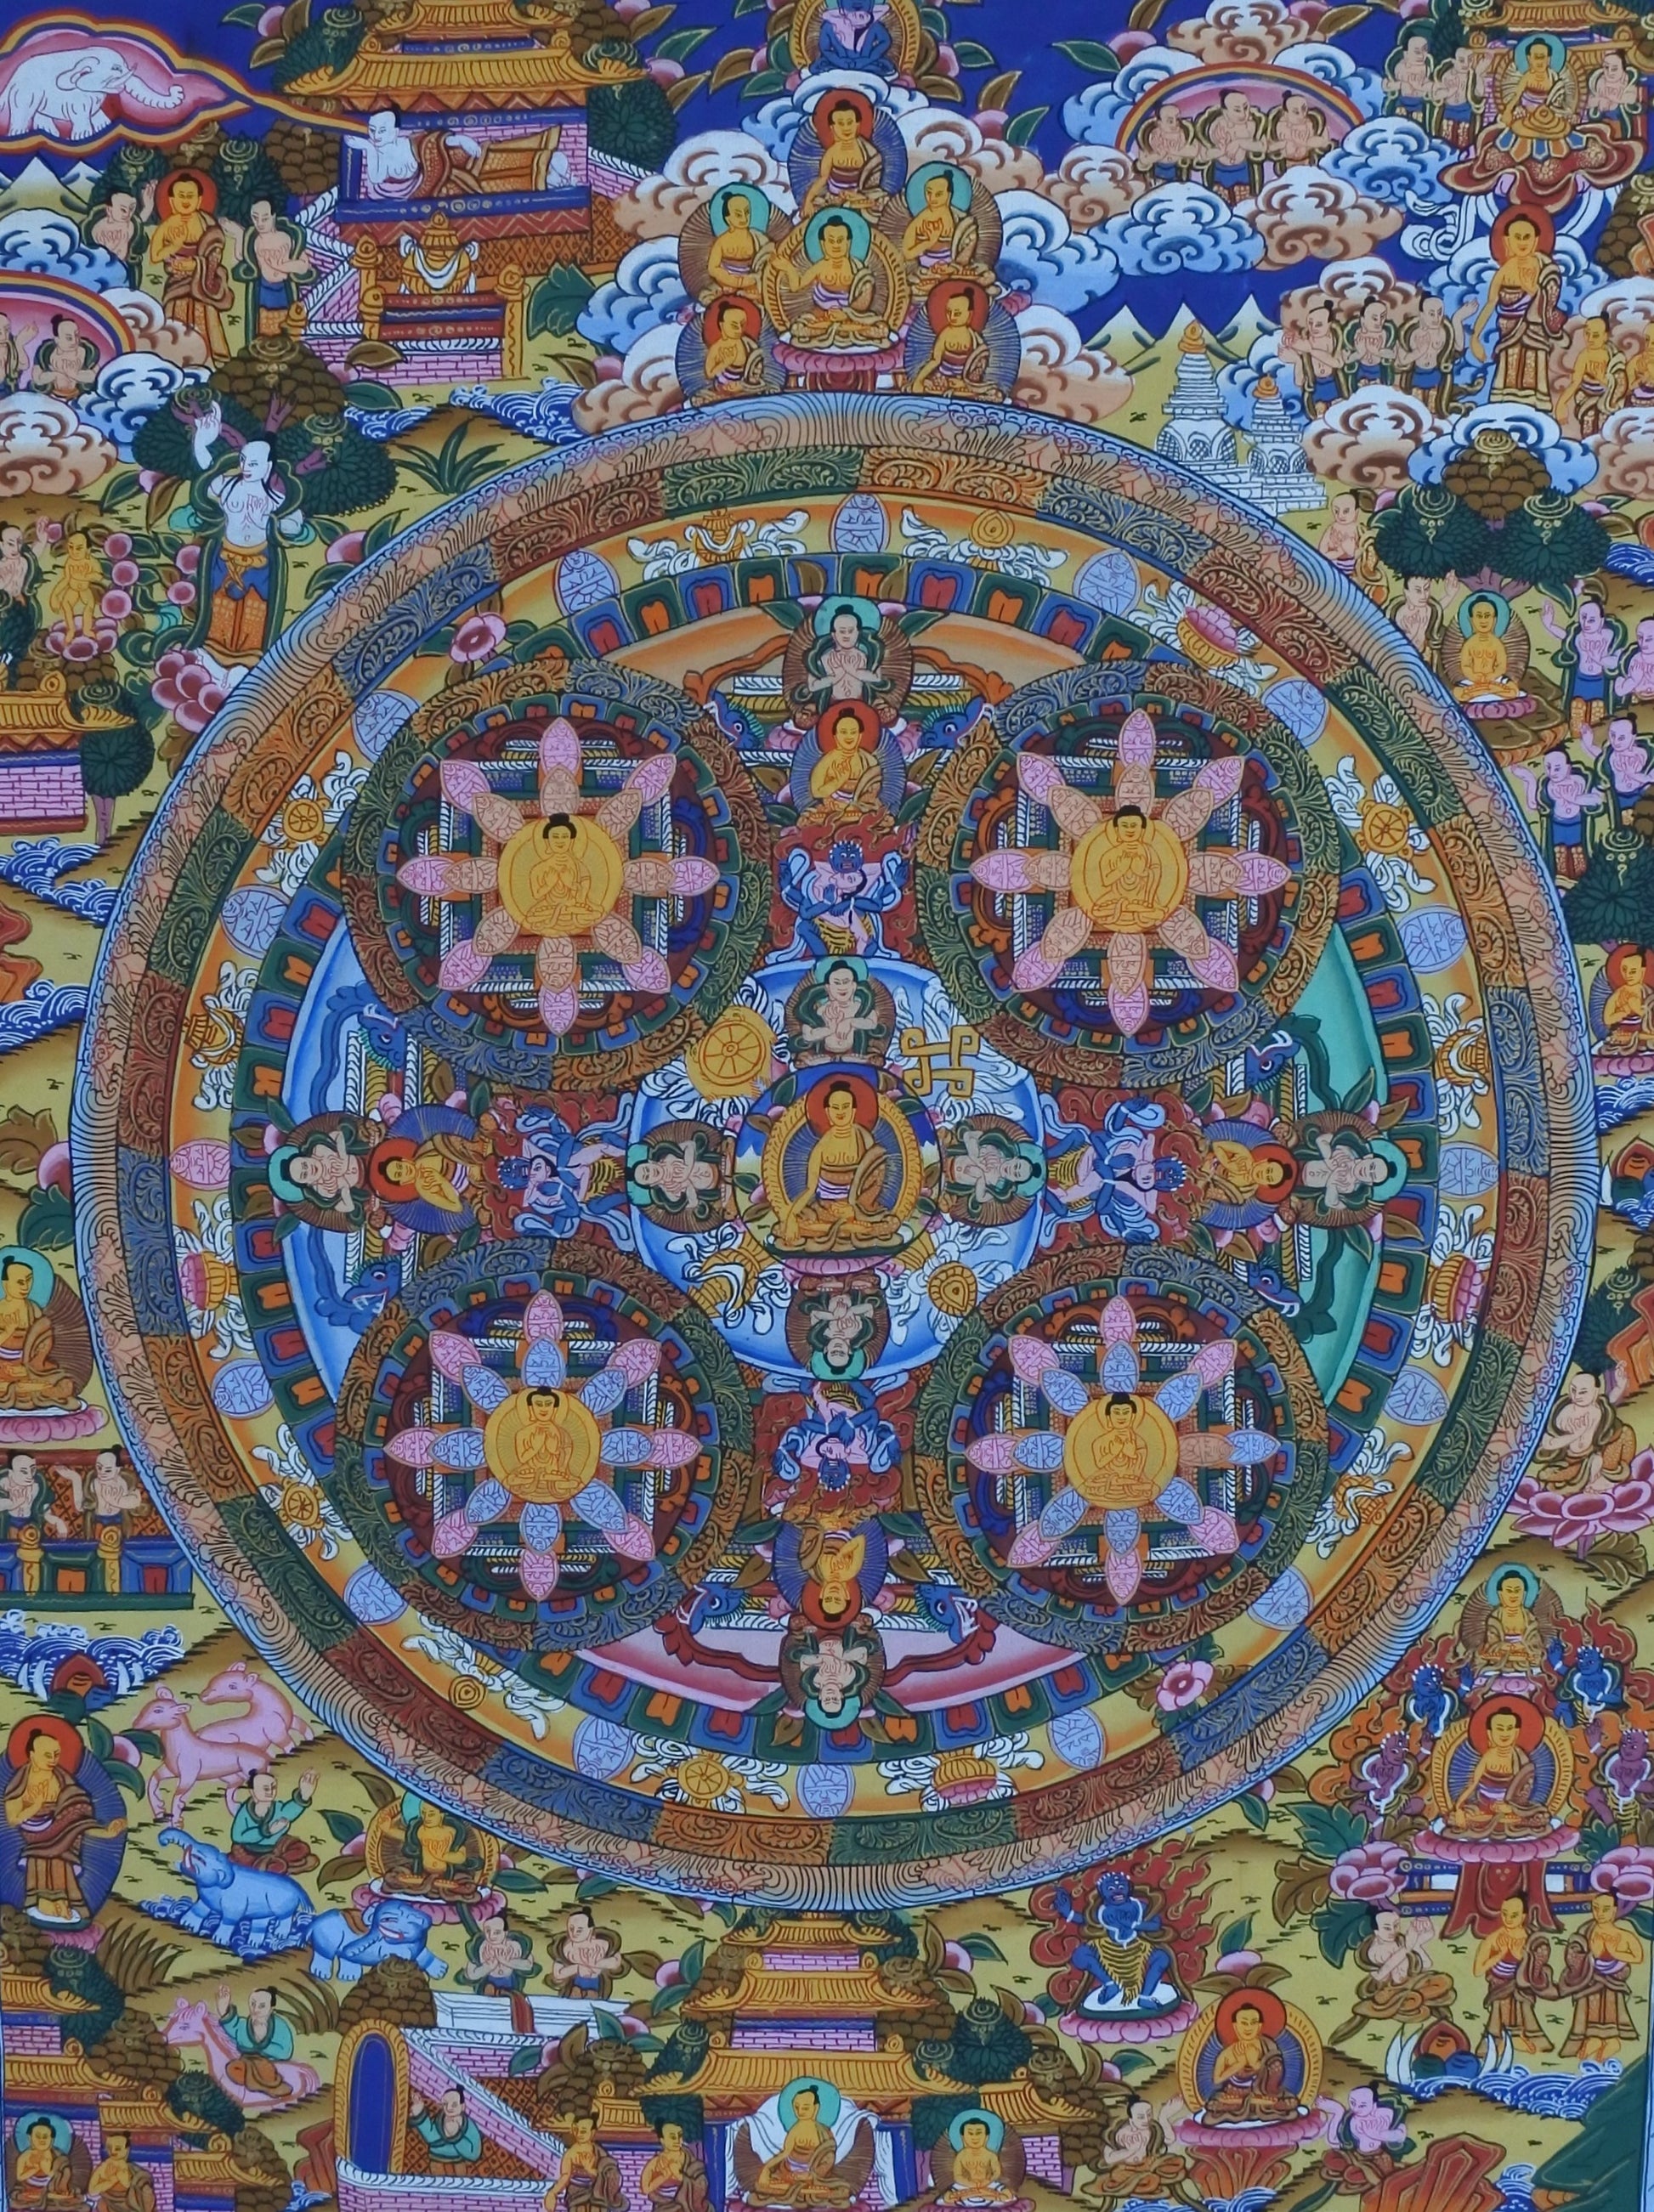 This elegant thangka painting illustrates Buddha in five circles surrounded by several wrathful deities and Bodhisattvas scattered around the mandala.